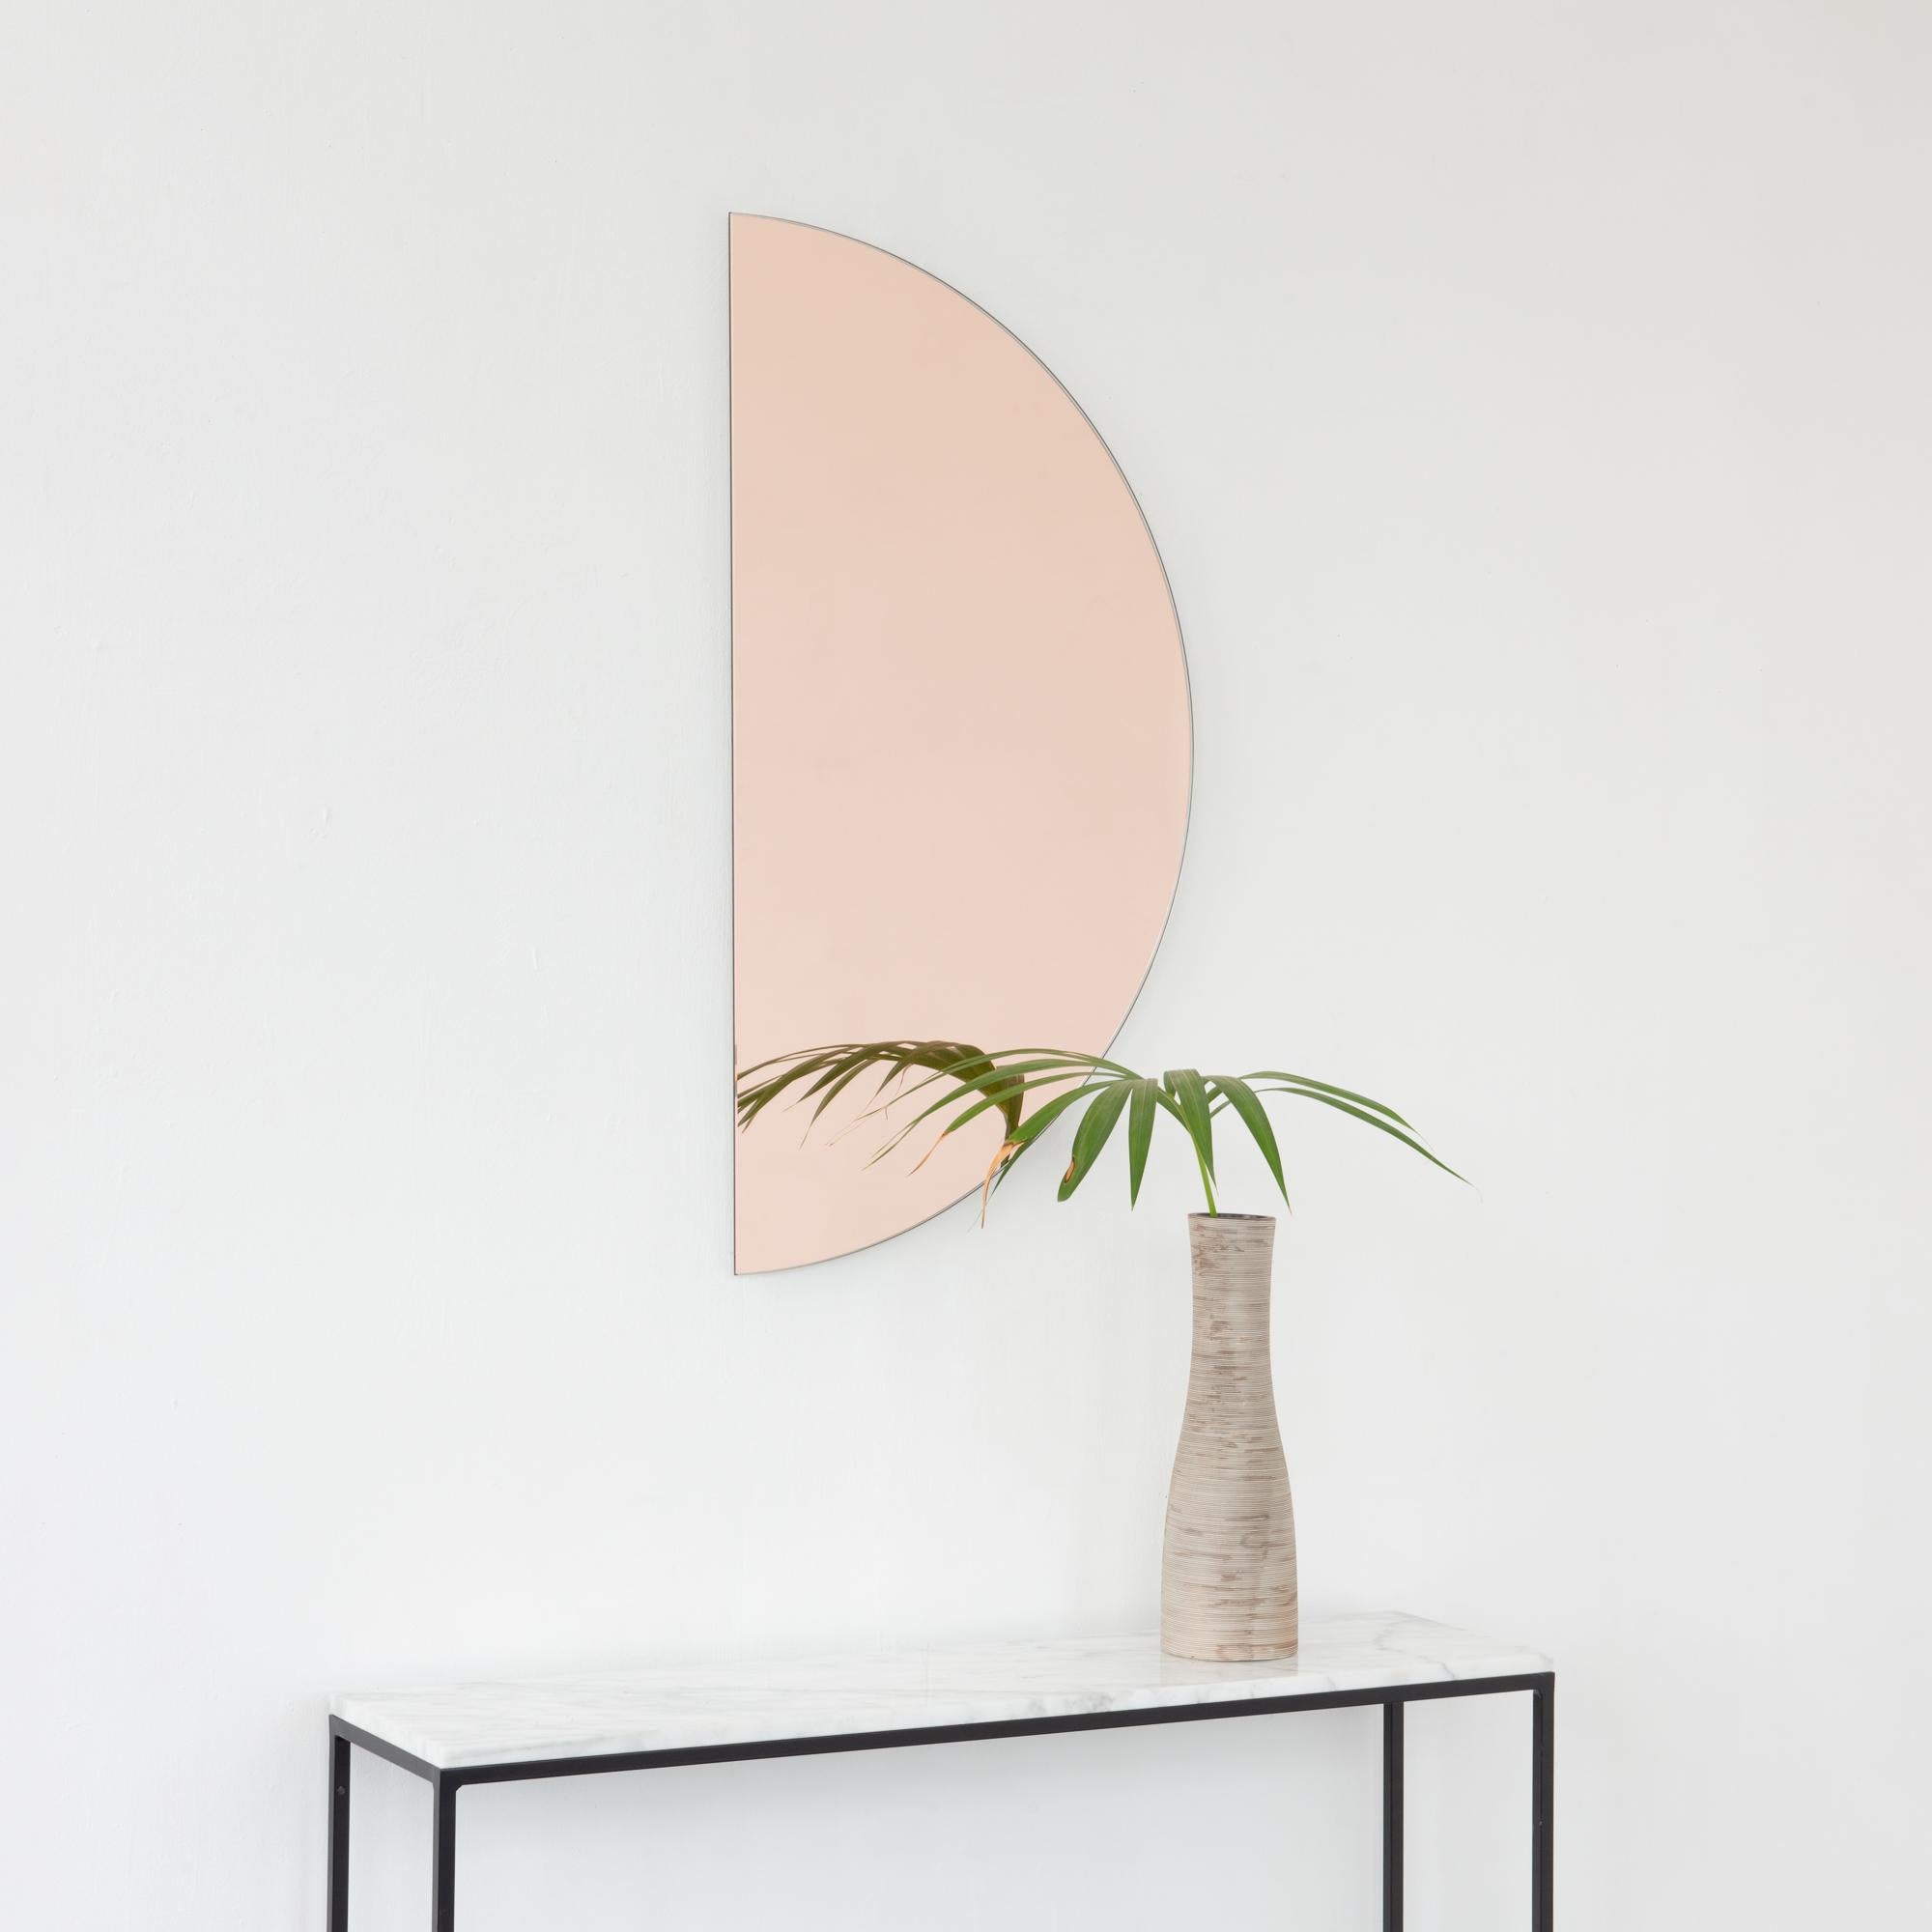 NEW DESIGN

Minimalist half-moon rose gold (peach) tinted frameless mirror with a floating effect. Fitted with a quality and ingenious hanging system for a flexible installation in 4 different directions. Designed and made in London, UK. 

The